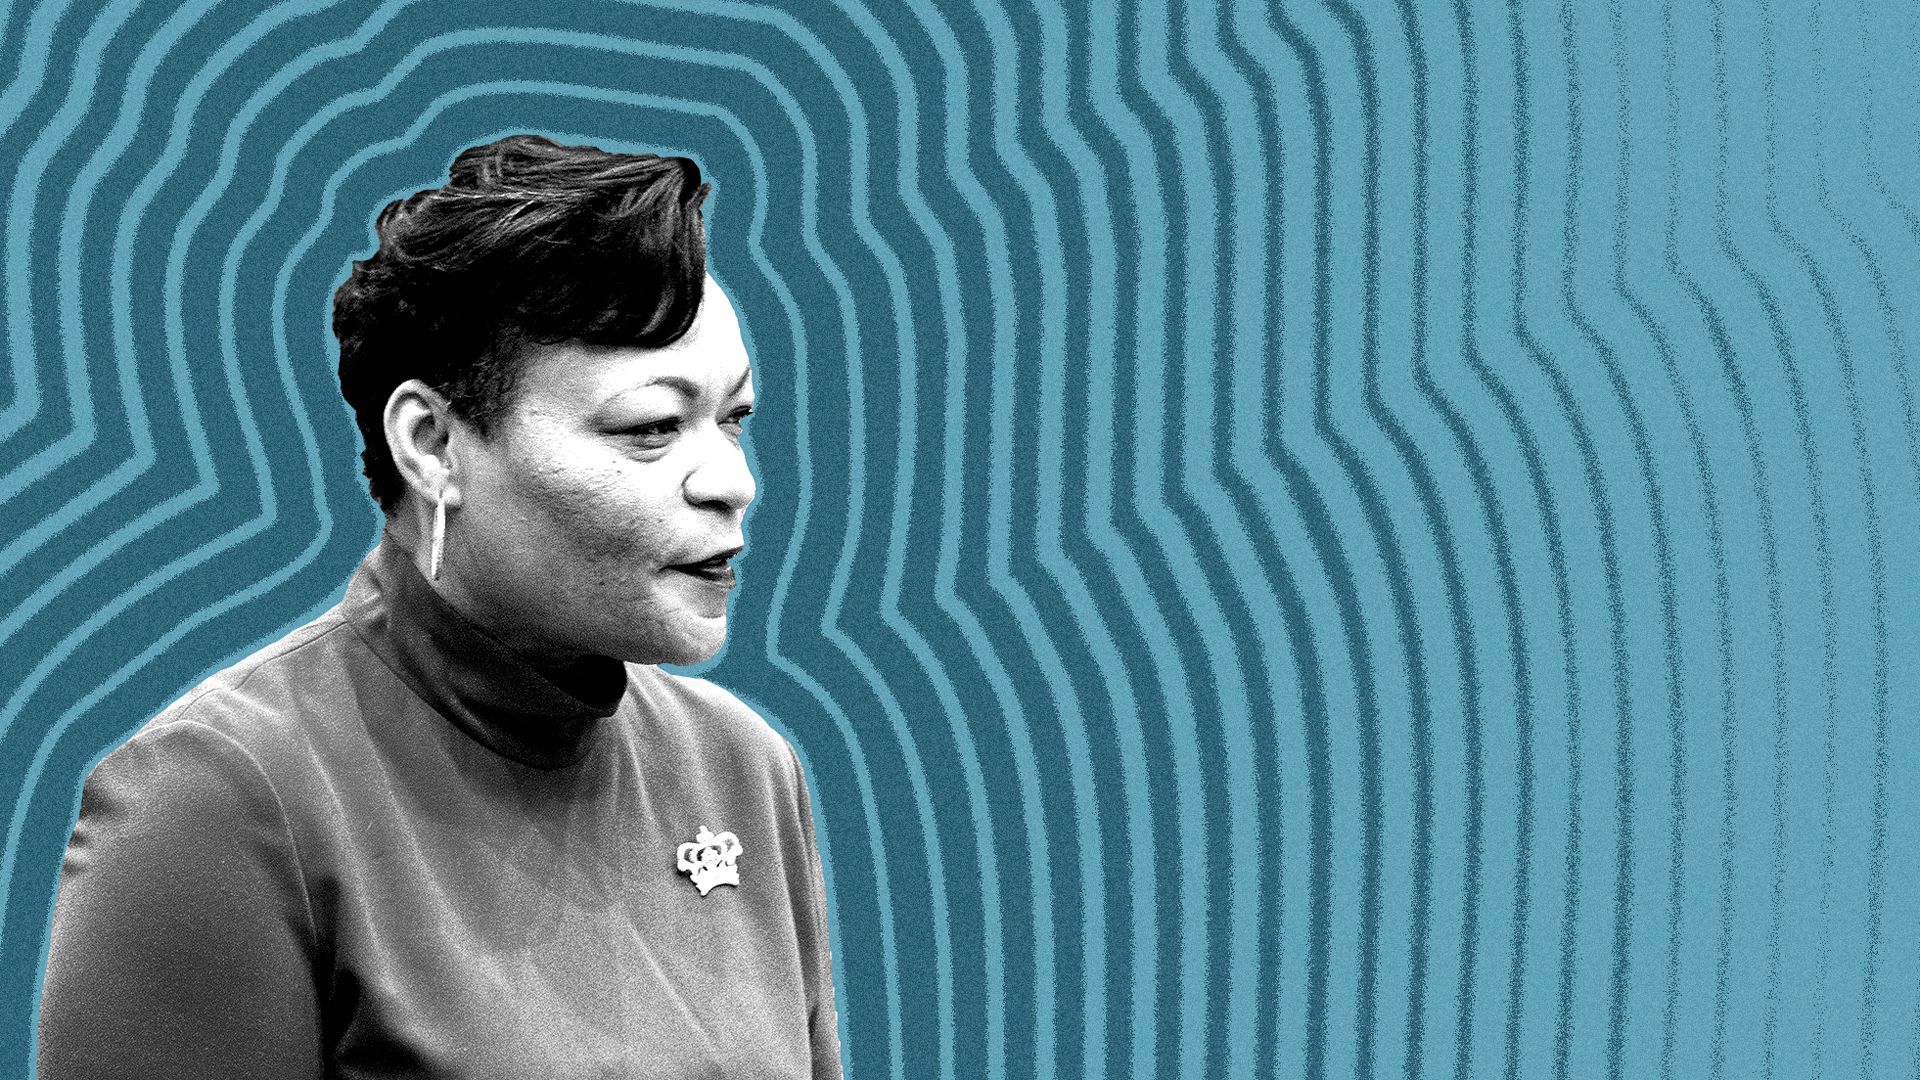 Photo illustration of LaToya Cantrell with lines radiating from her.